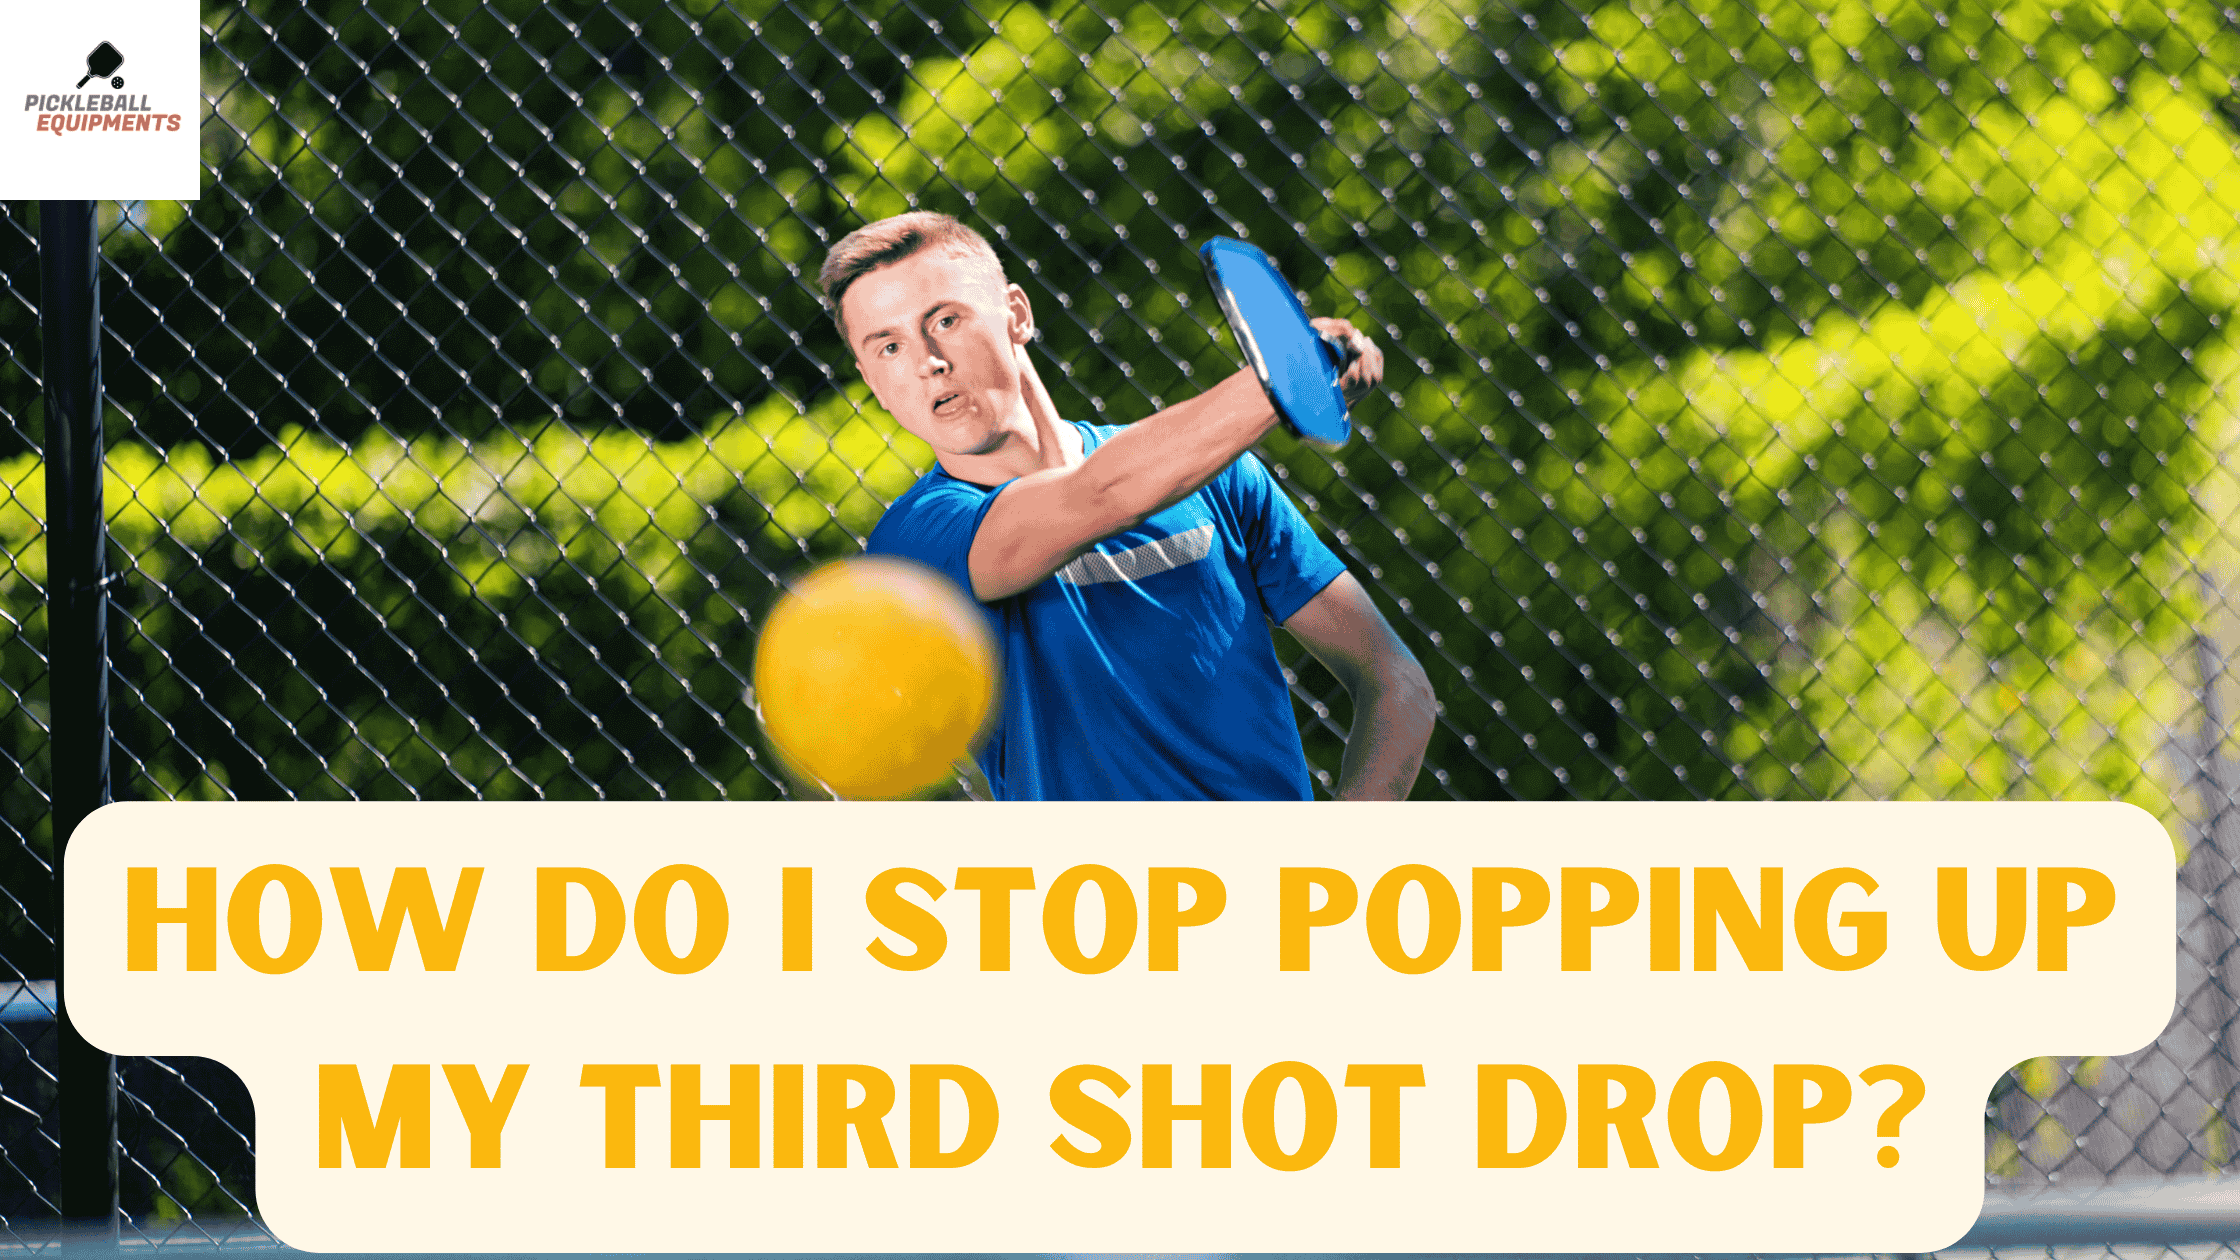 How do I stop popping up my third shot drop